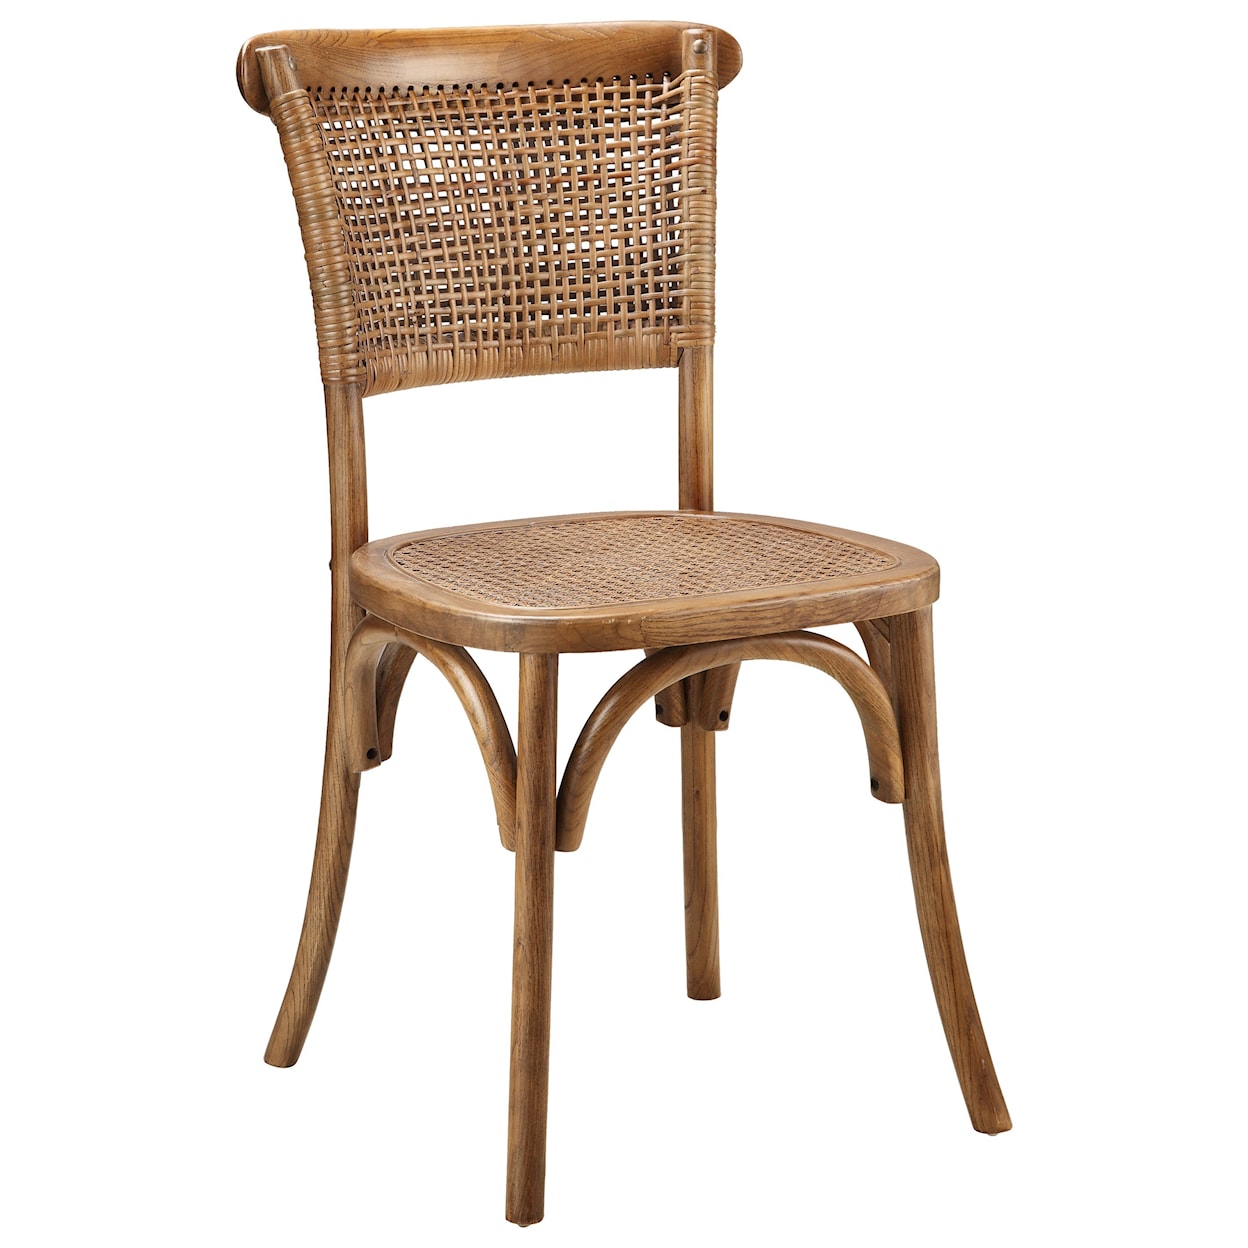 Moe's Home Collection Churchill Dining Chair